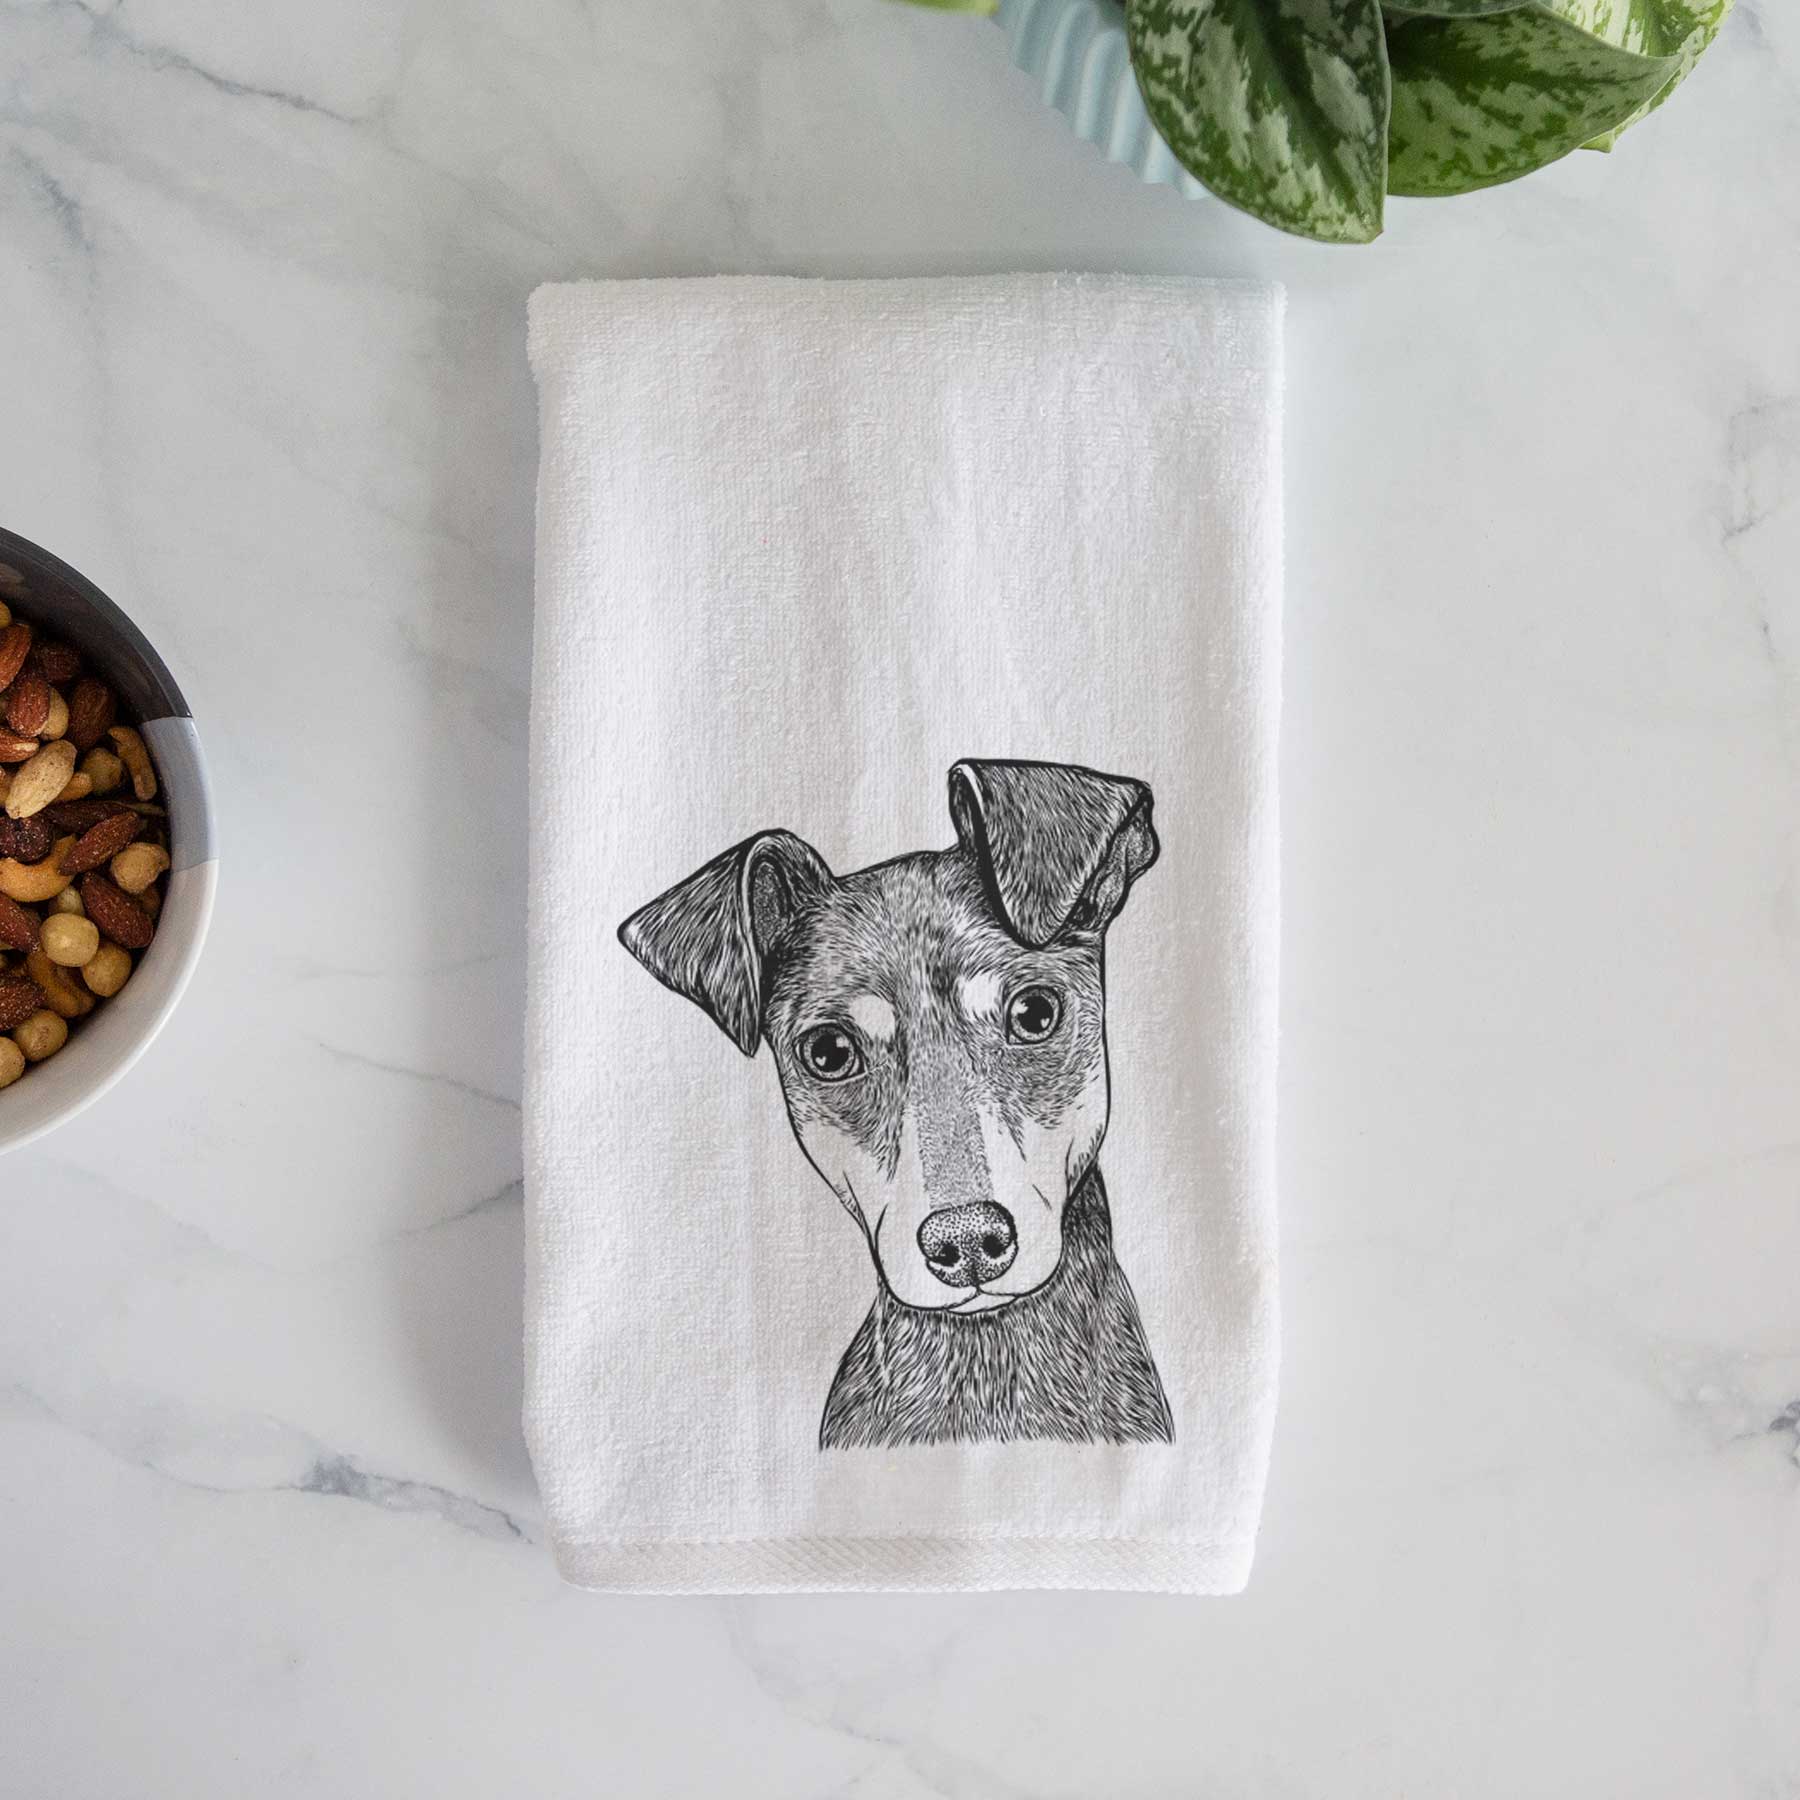 Manny the Manchester Terrier Hand Towel